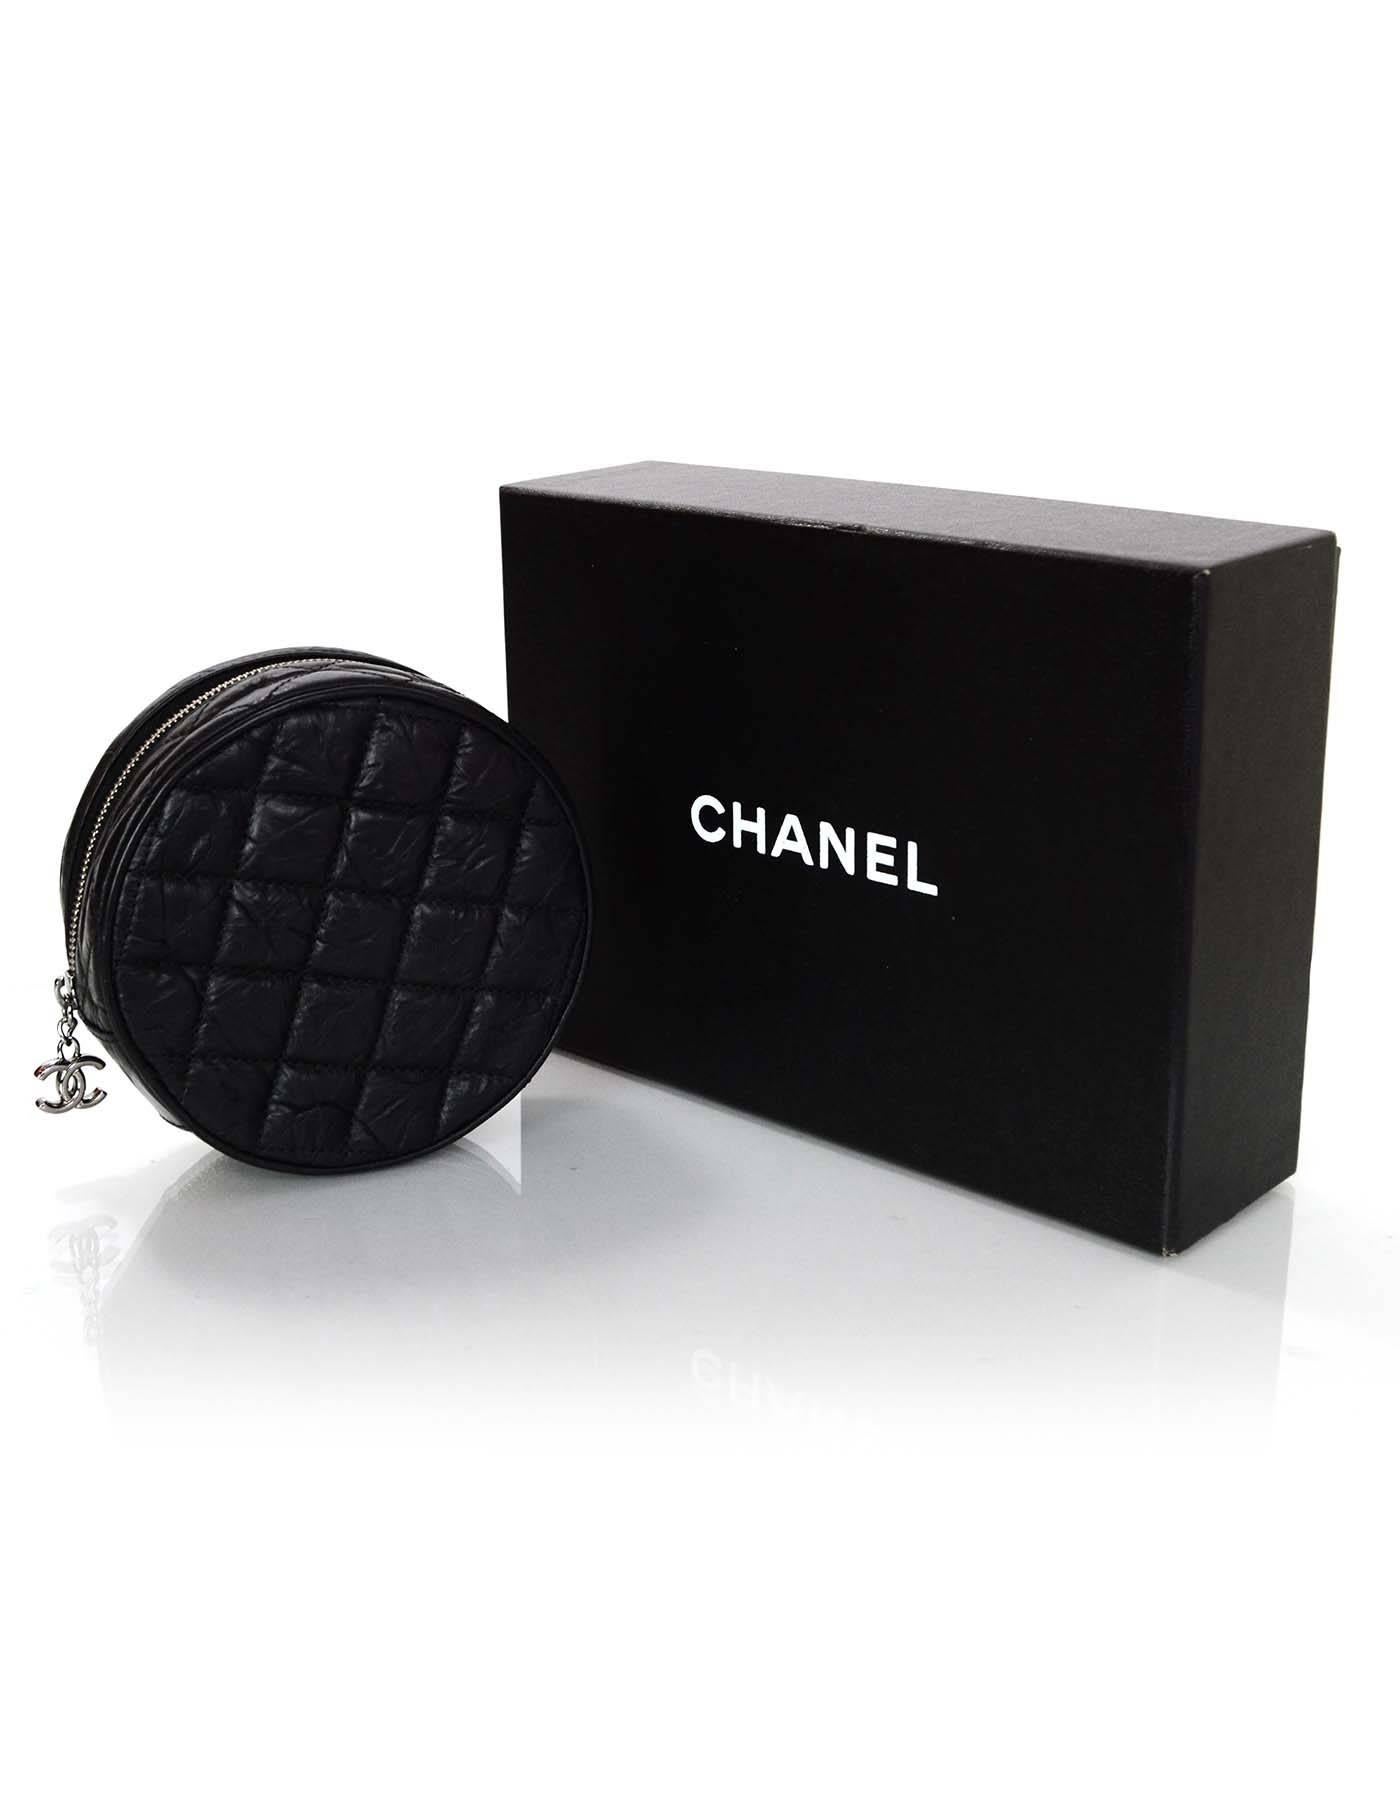 Chanel Black Distressed Leather Jewelry Case 3